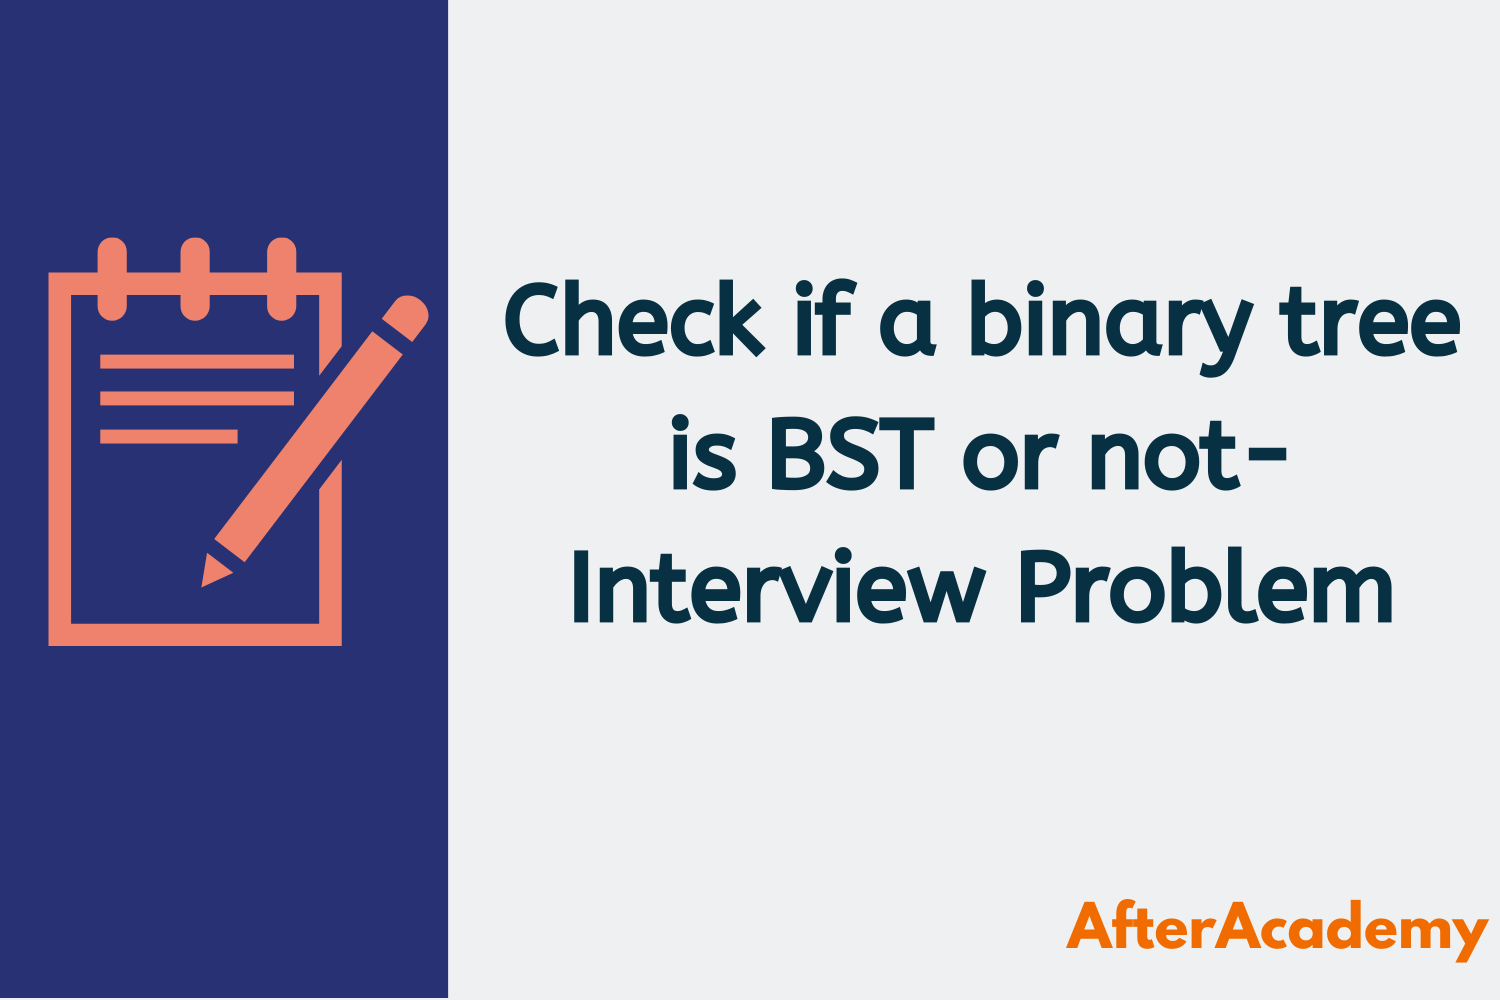 Check if a binary tree is BST or not - Interview Problem